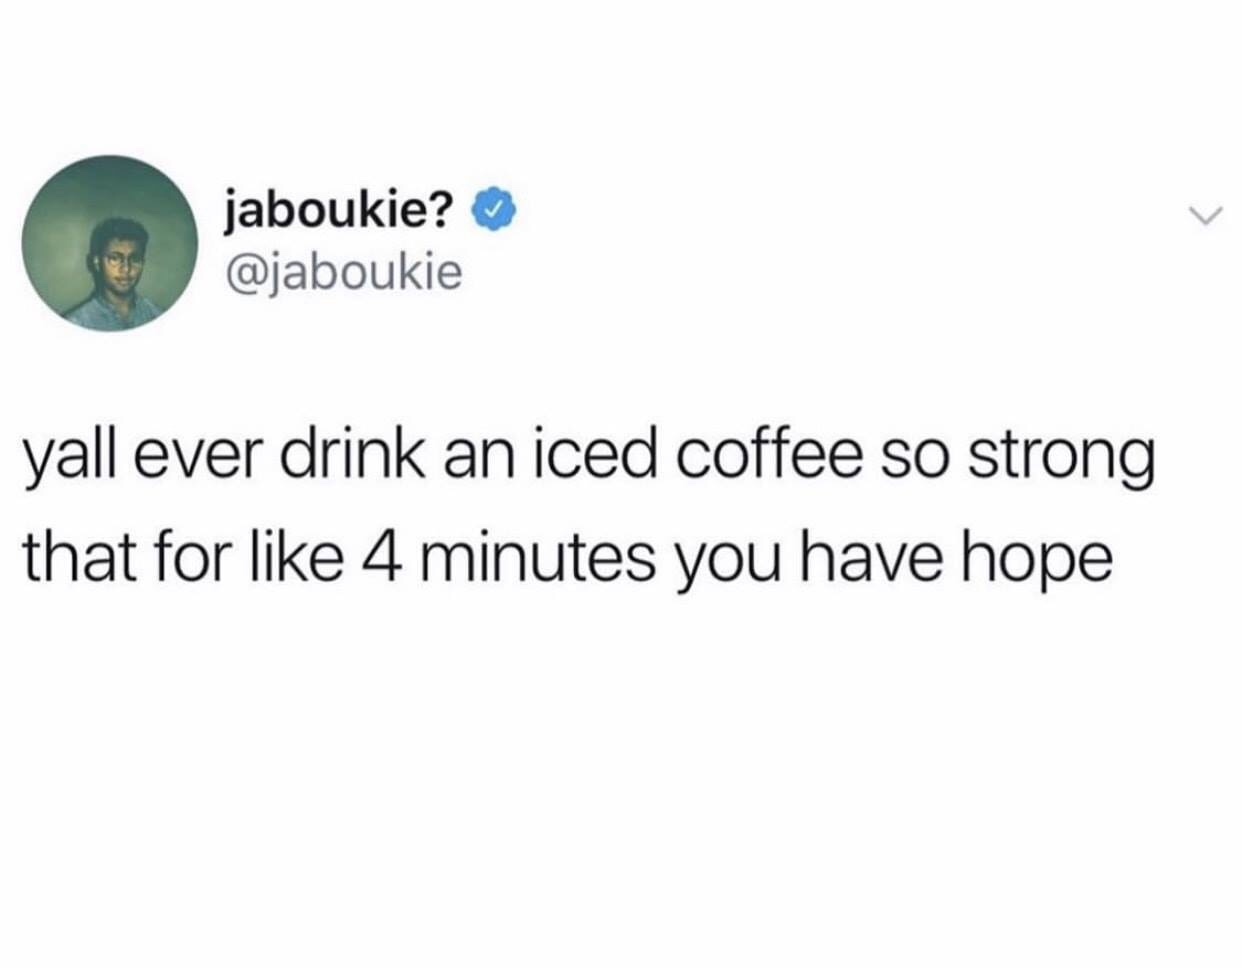 memes people who show you new music - jaboukie? yall ever drink an iced coffee so strong that for 4 minutes you have hope